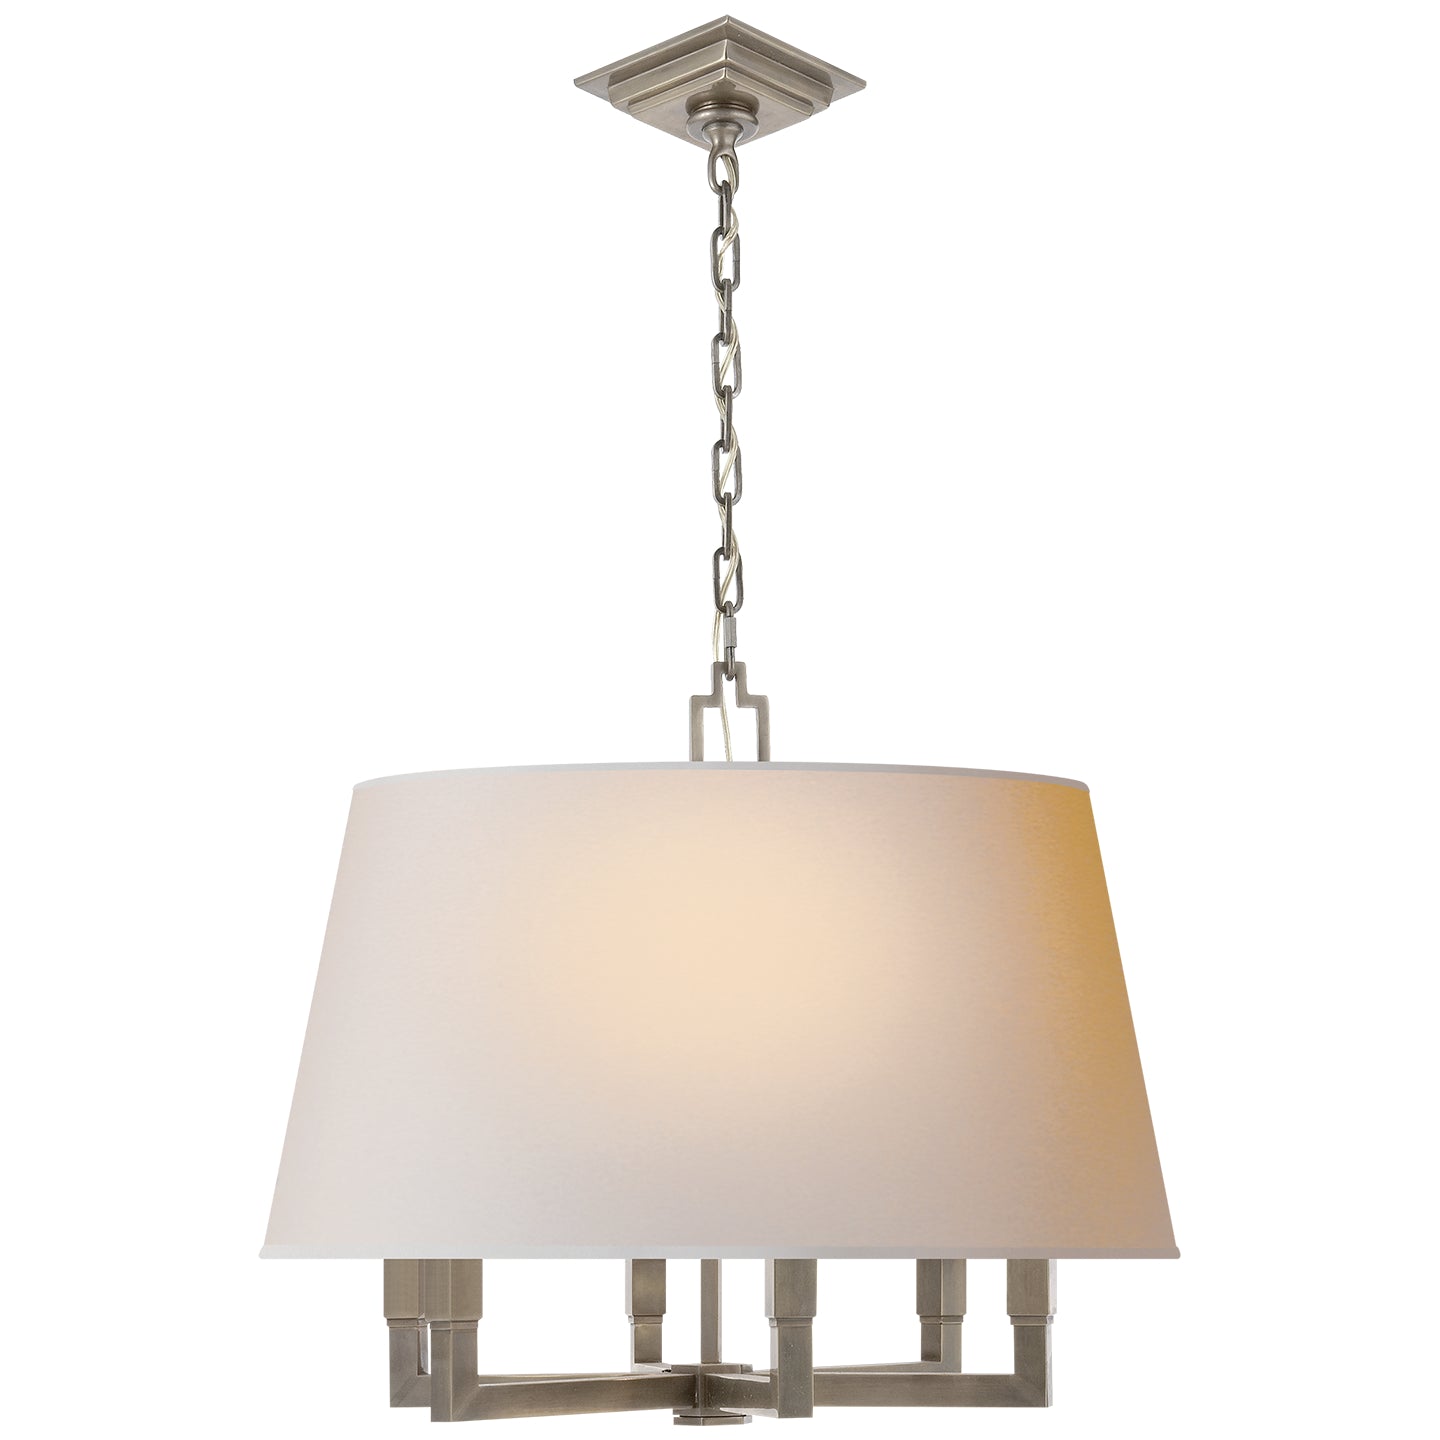 Load image into Gallery viewer, Visual Comfort Signature - SL 5820AN-NP - Six Light Pendant - Square Tube - Antique Nickel
